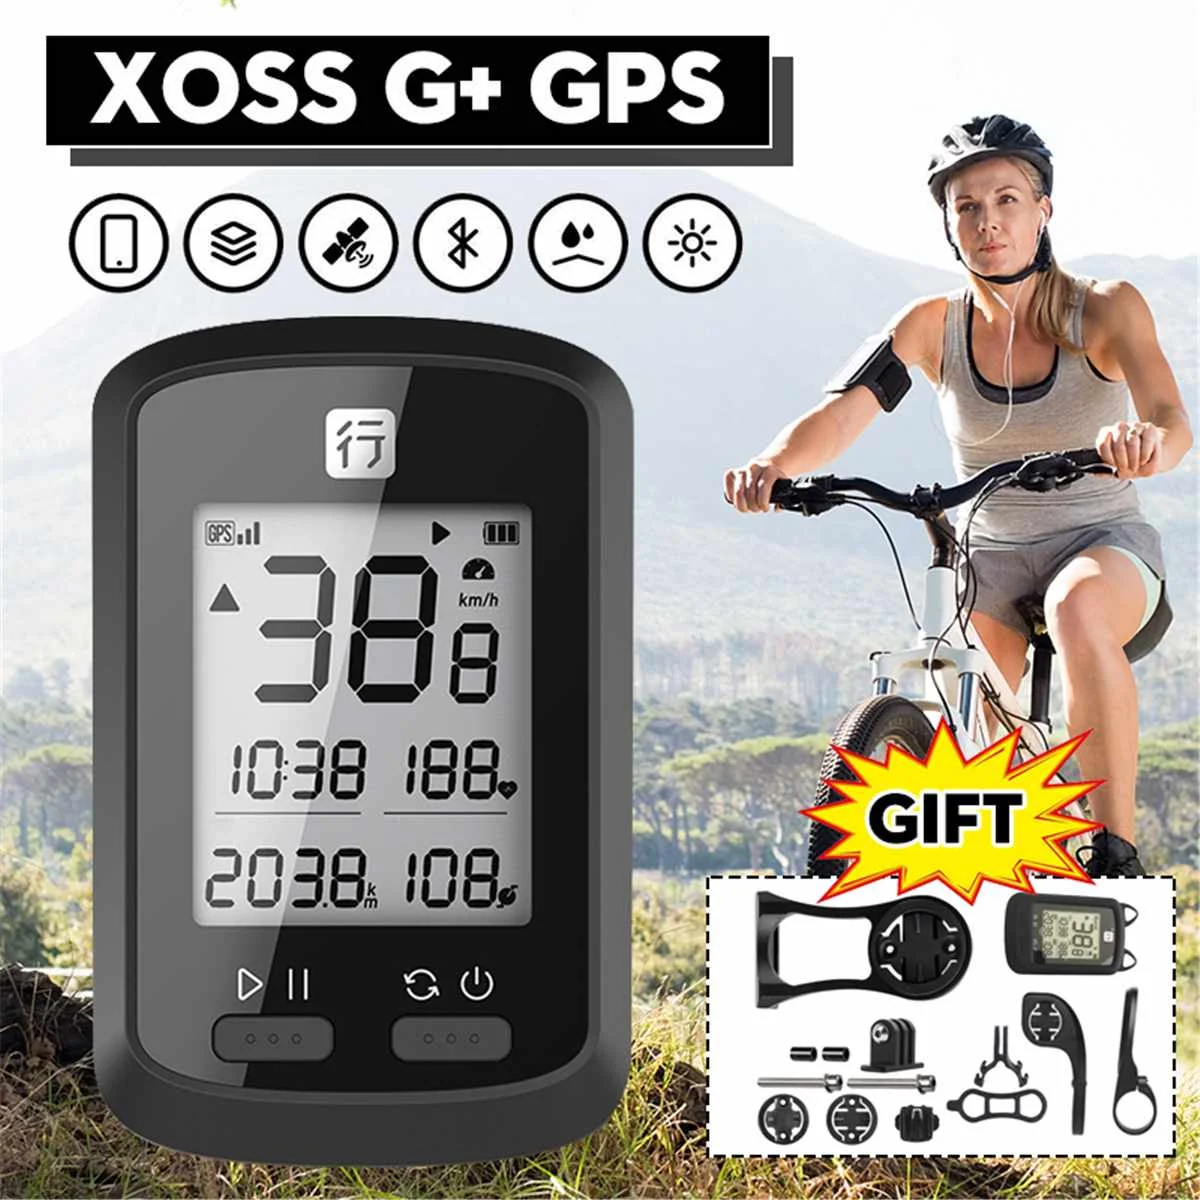 

XOSS G Wireless Speedometer GPS Bicycle Odometer Bluetooth Cycle Tracker Waterproof Road Bike MTB Cycling Computer For Riding